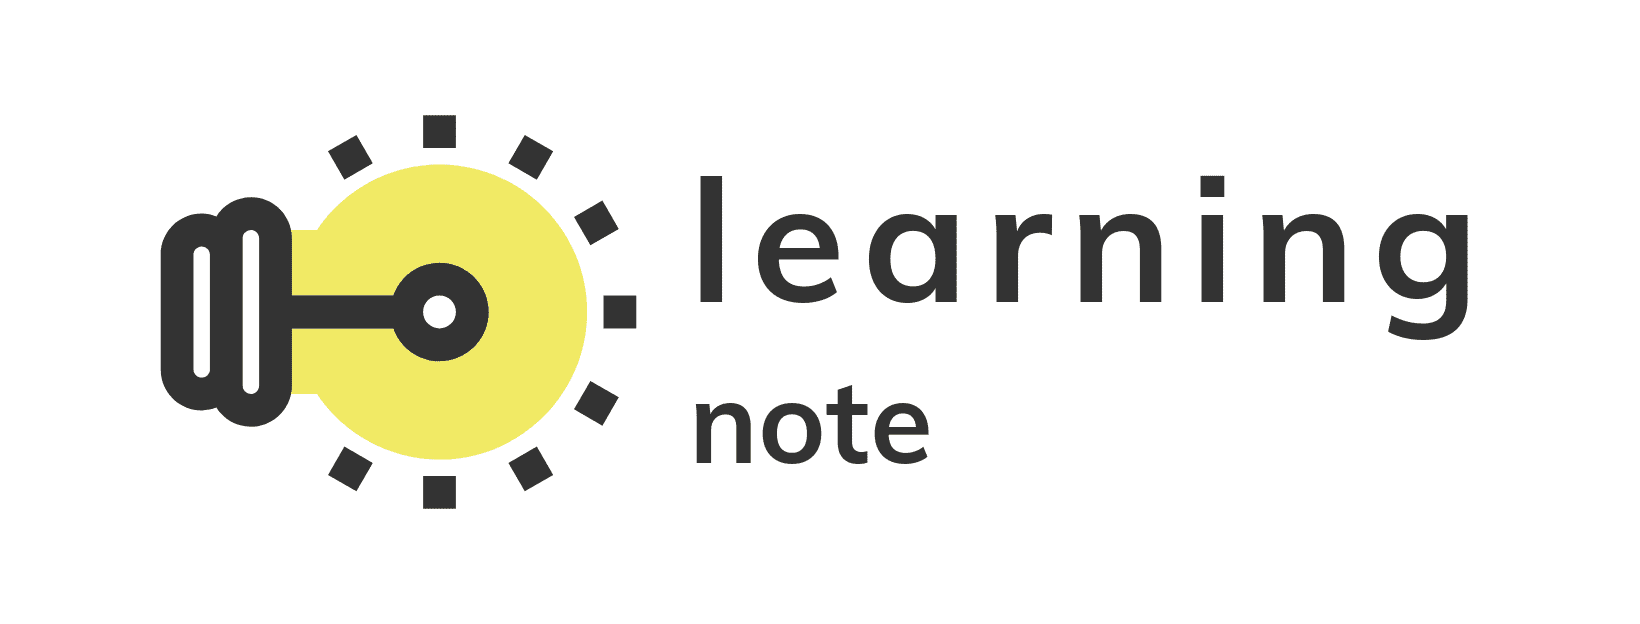 learning note